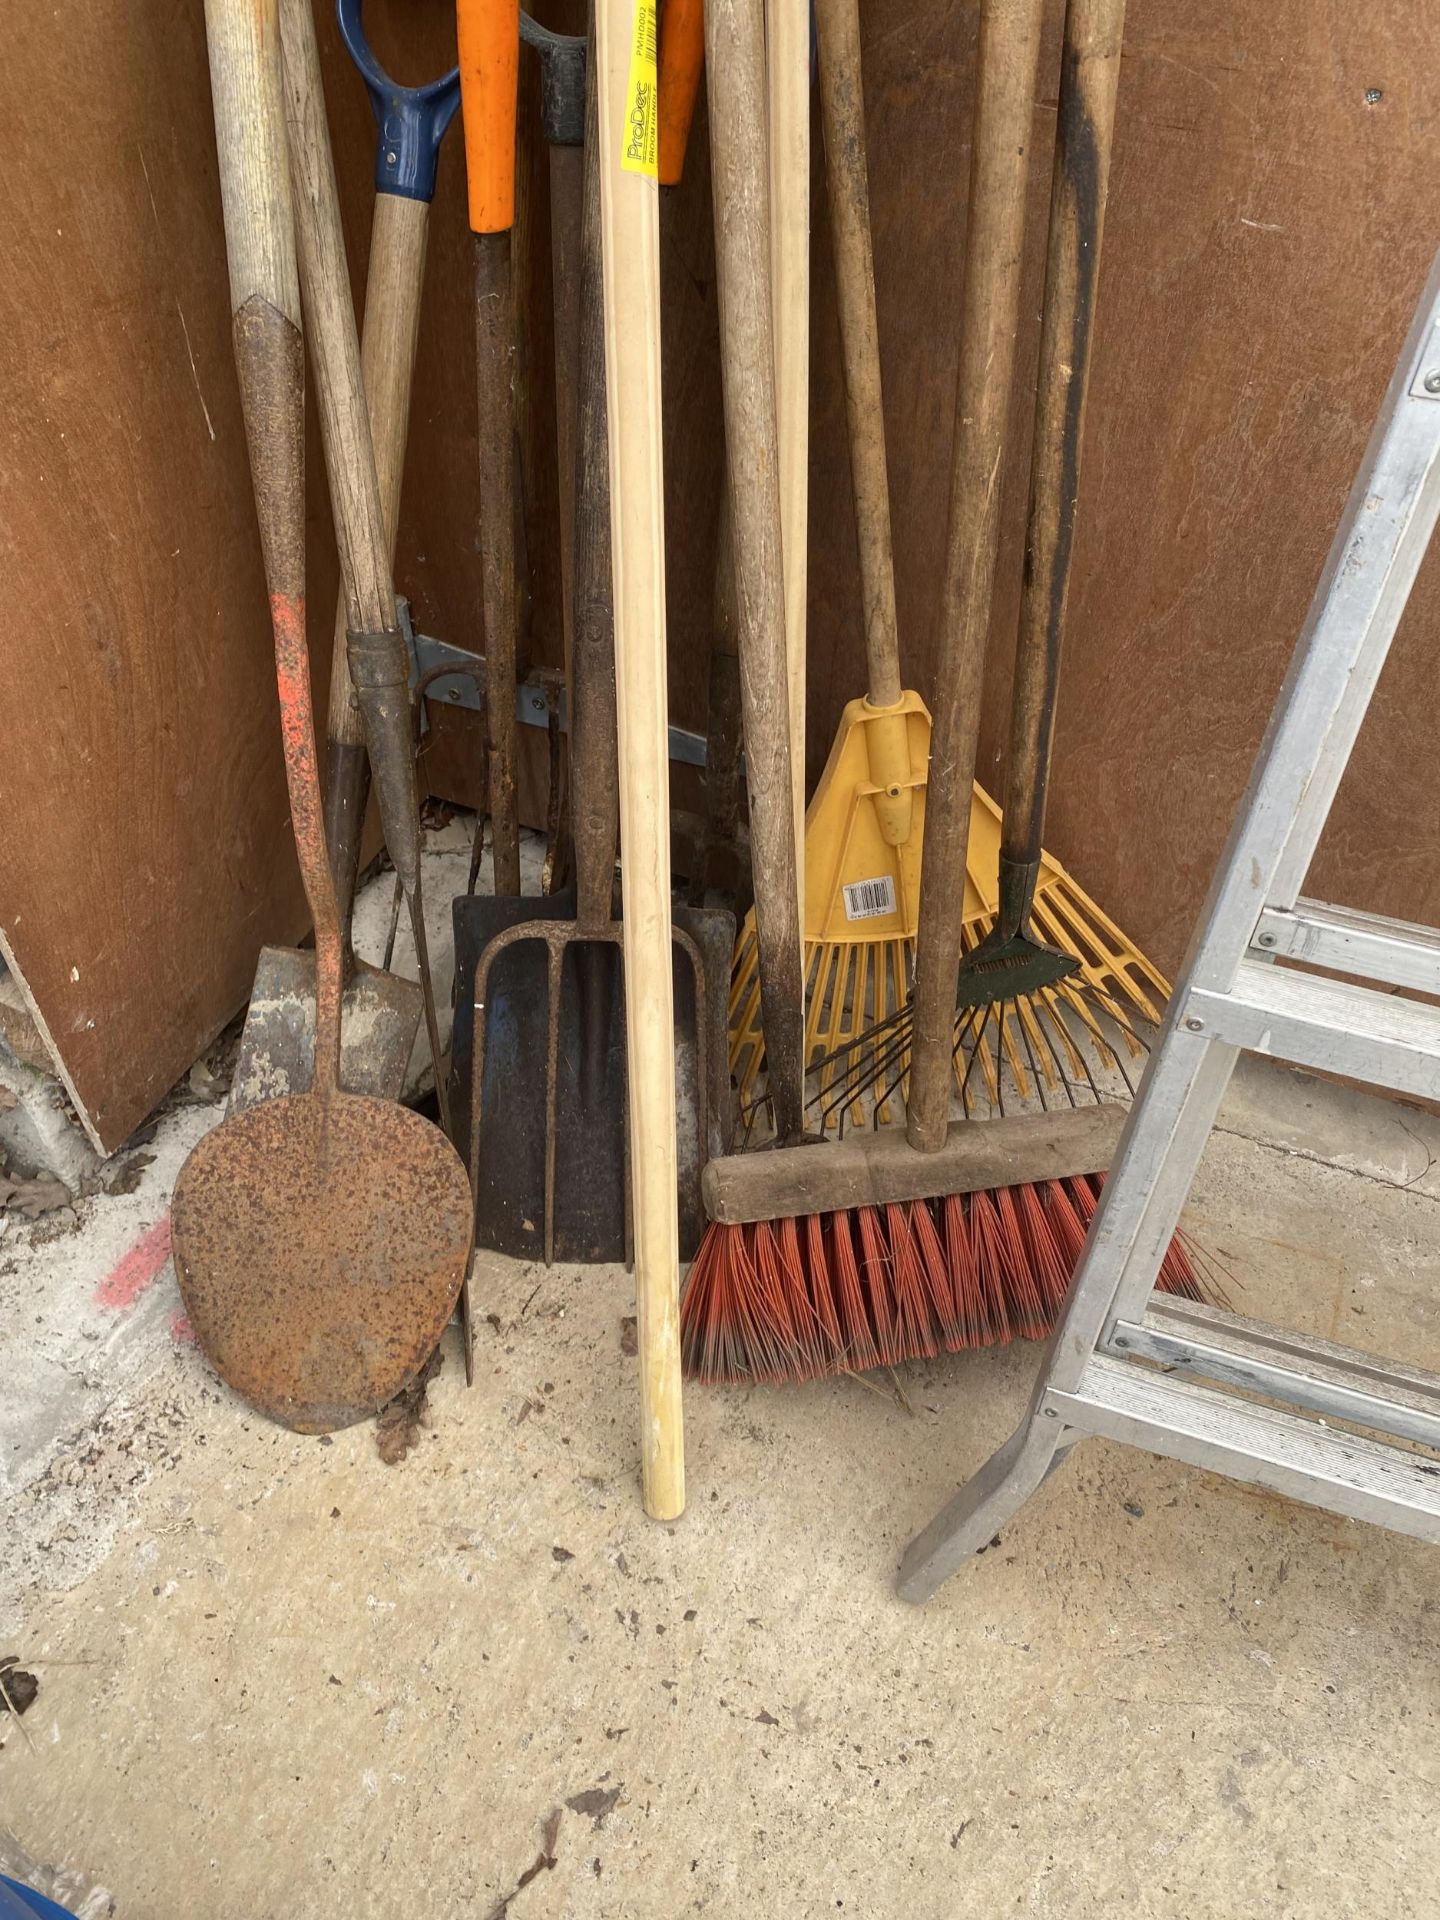 A SET OF STEP LADDERS AND ASSORTED GARDEN TOOLS ETC - Image 4 of 5